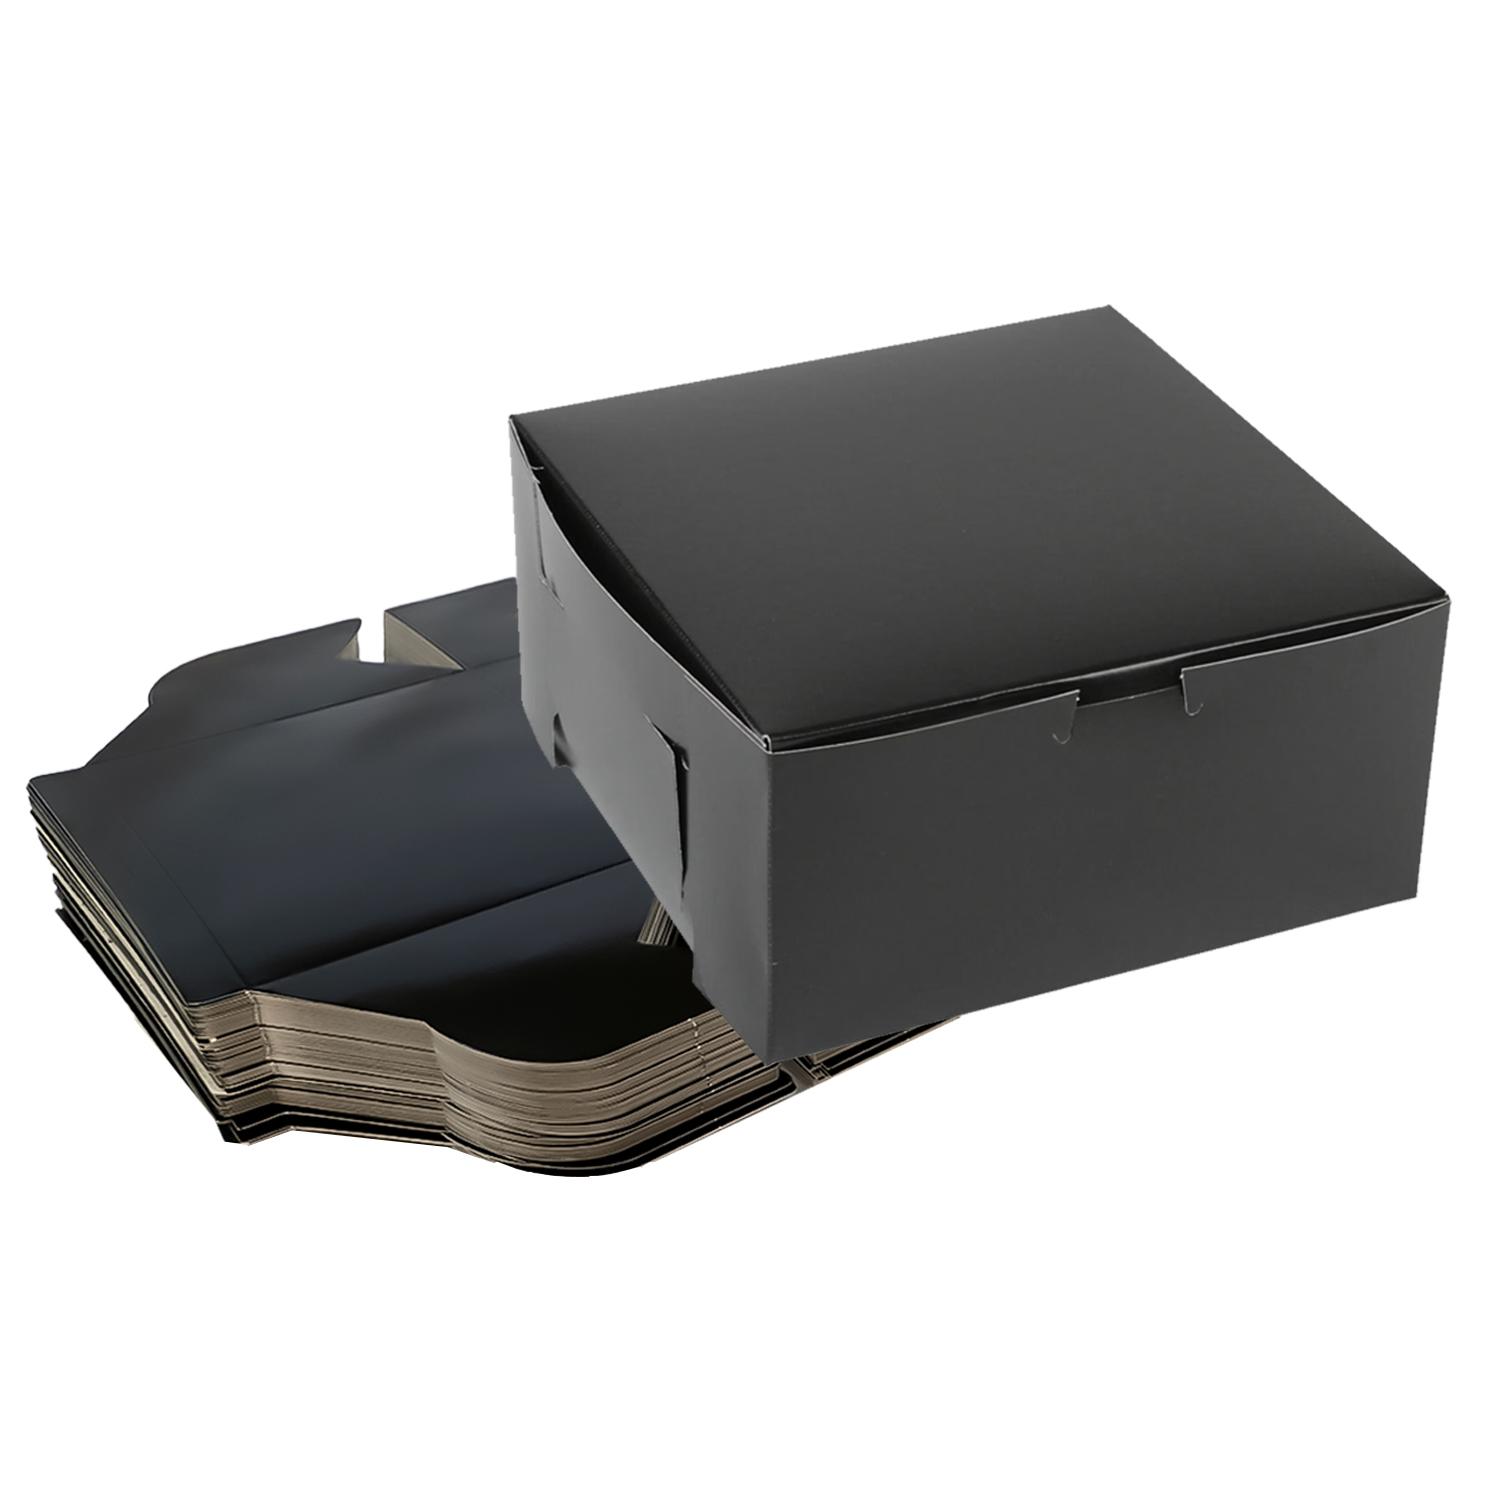 PACK OF 100 -  BLACK 12 X 12 X 4 Inches CAKE BOXES